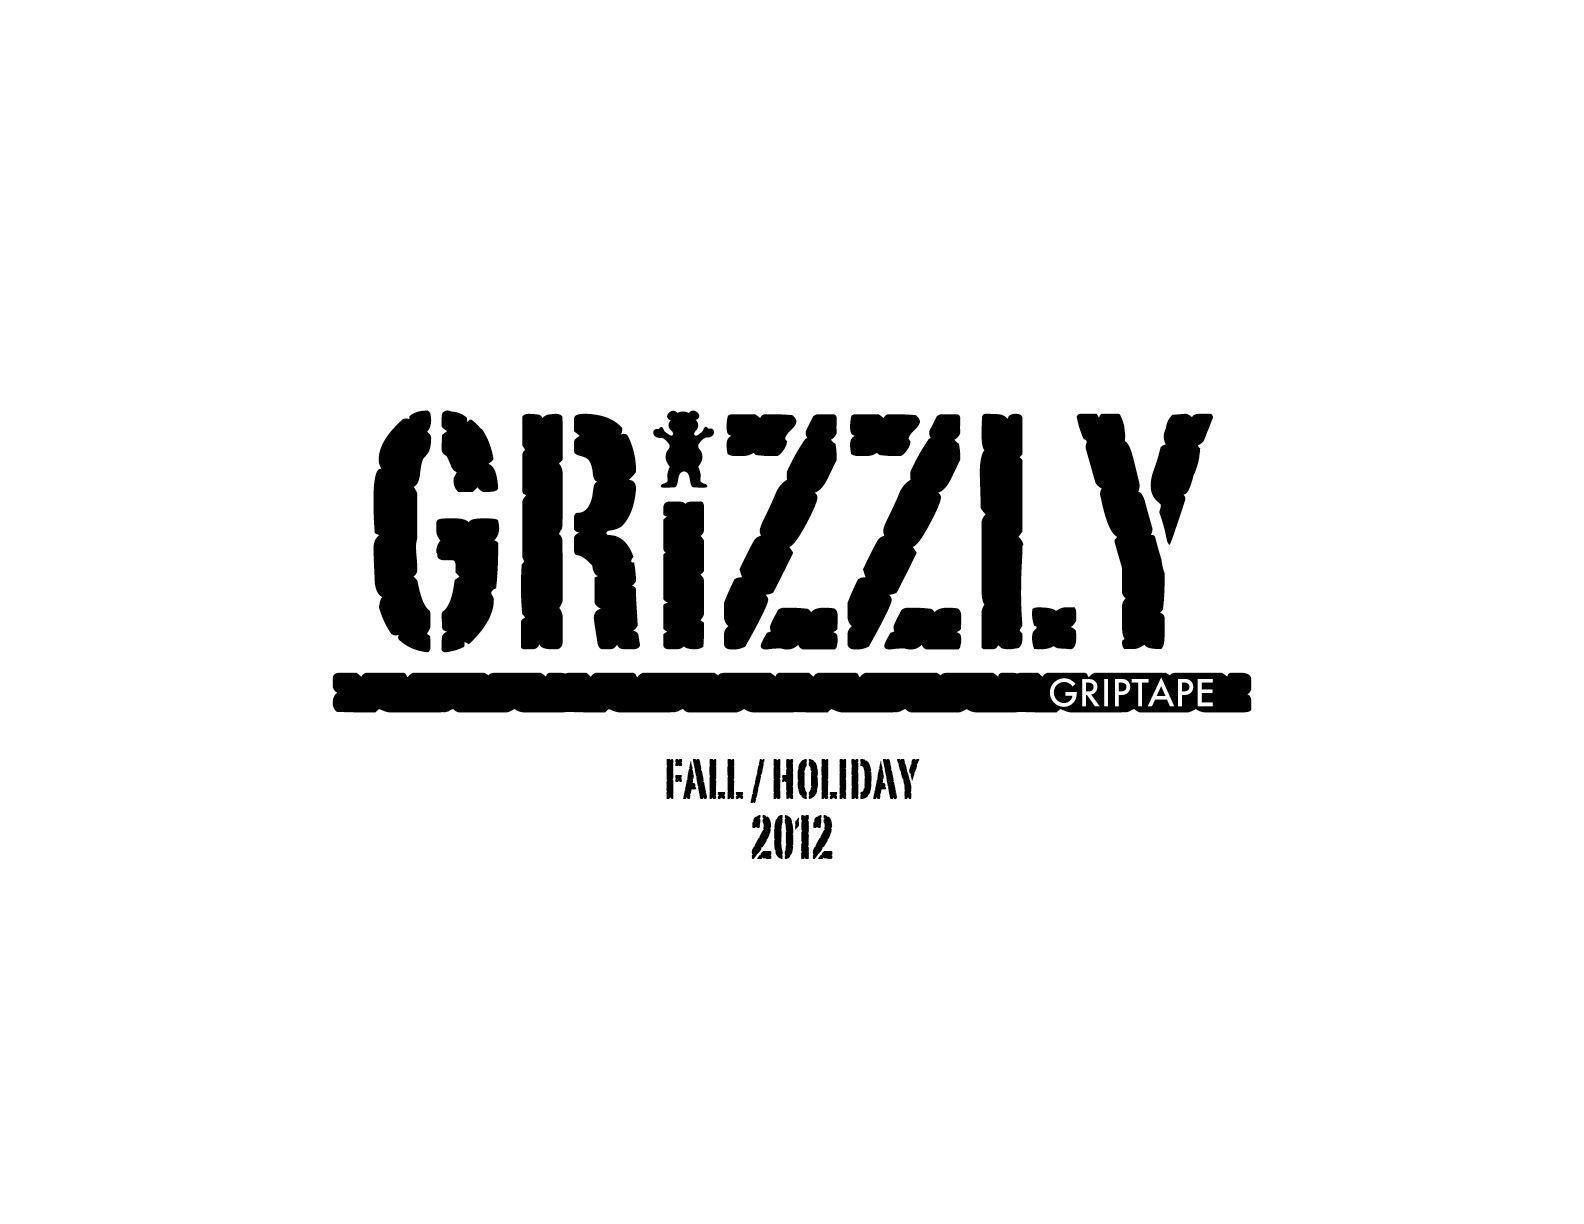 Grizzly Grip Logo - Grizzly Grip Wallpapers - Wallpaper Cave